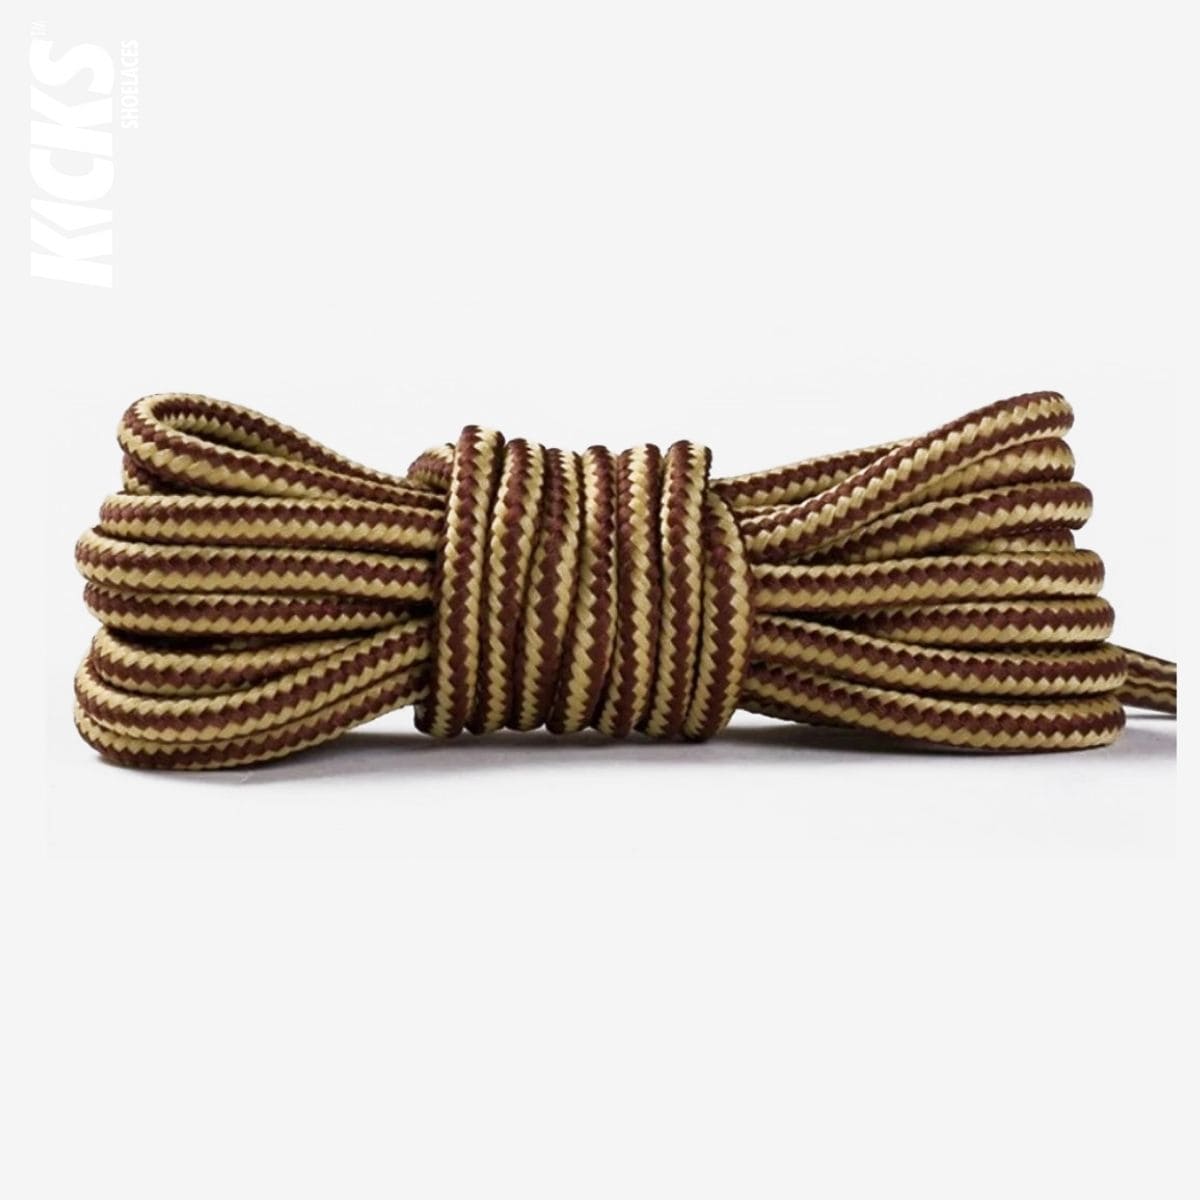 striped-two-color-shoelaces-for-casual-shoes-in-deep-brown-and-yellow